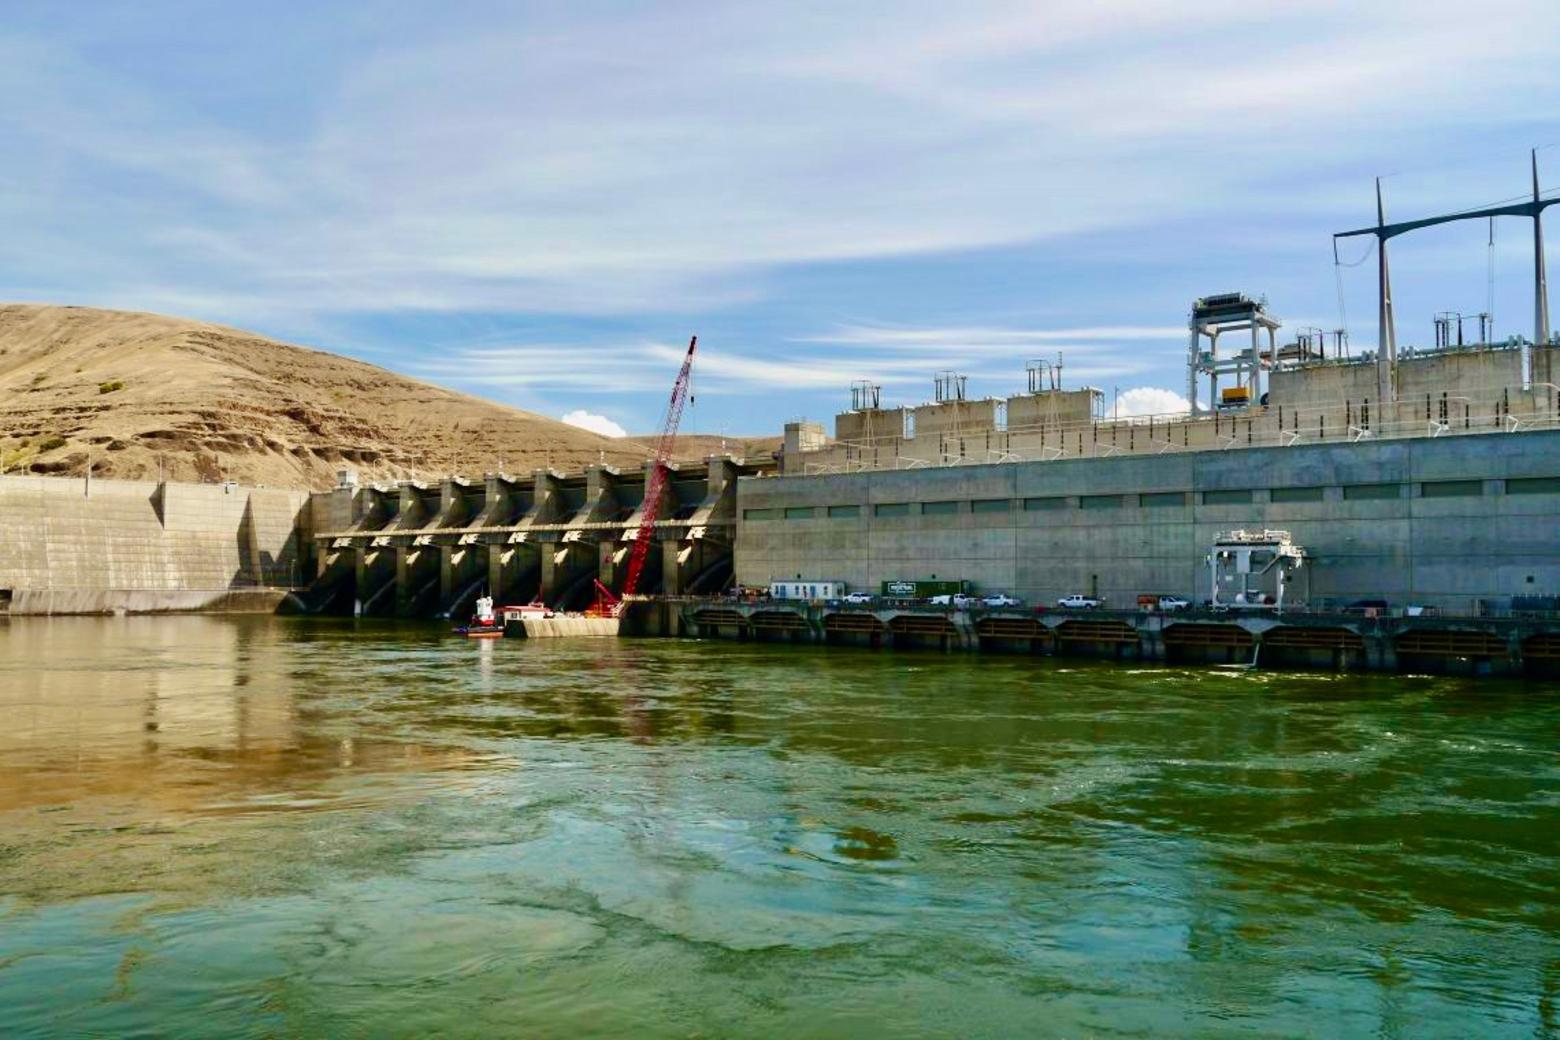 After decades of denial, spiraling fish declines, billions spent trying to re-engineer a fix and irreverence for science, it's now clear that dam removal is necessary if America is going to save its salmon in the Pacific Northwest.  Equivalent to the near-extinction of bison, recovery is possible but it requires courage, especially with the additive negative impacts of climate change. Photo of  dam courtesy Trout Unlimited